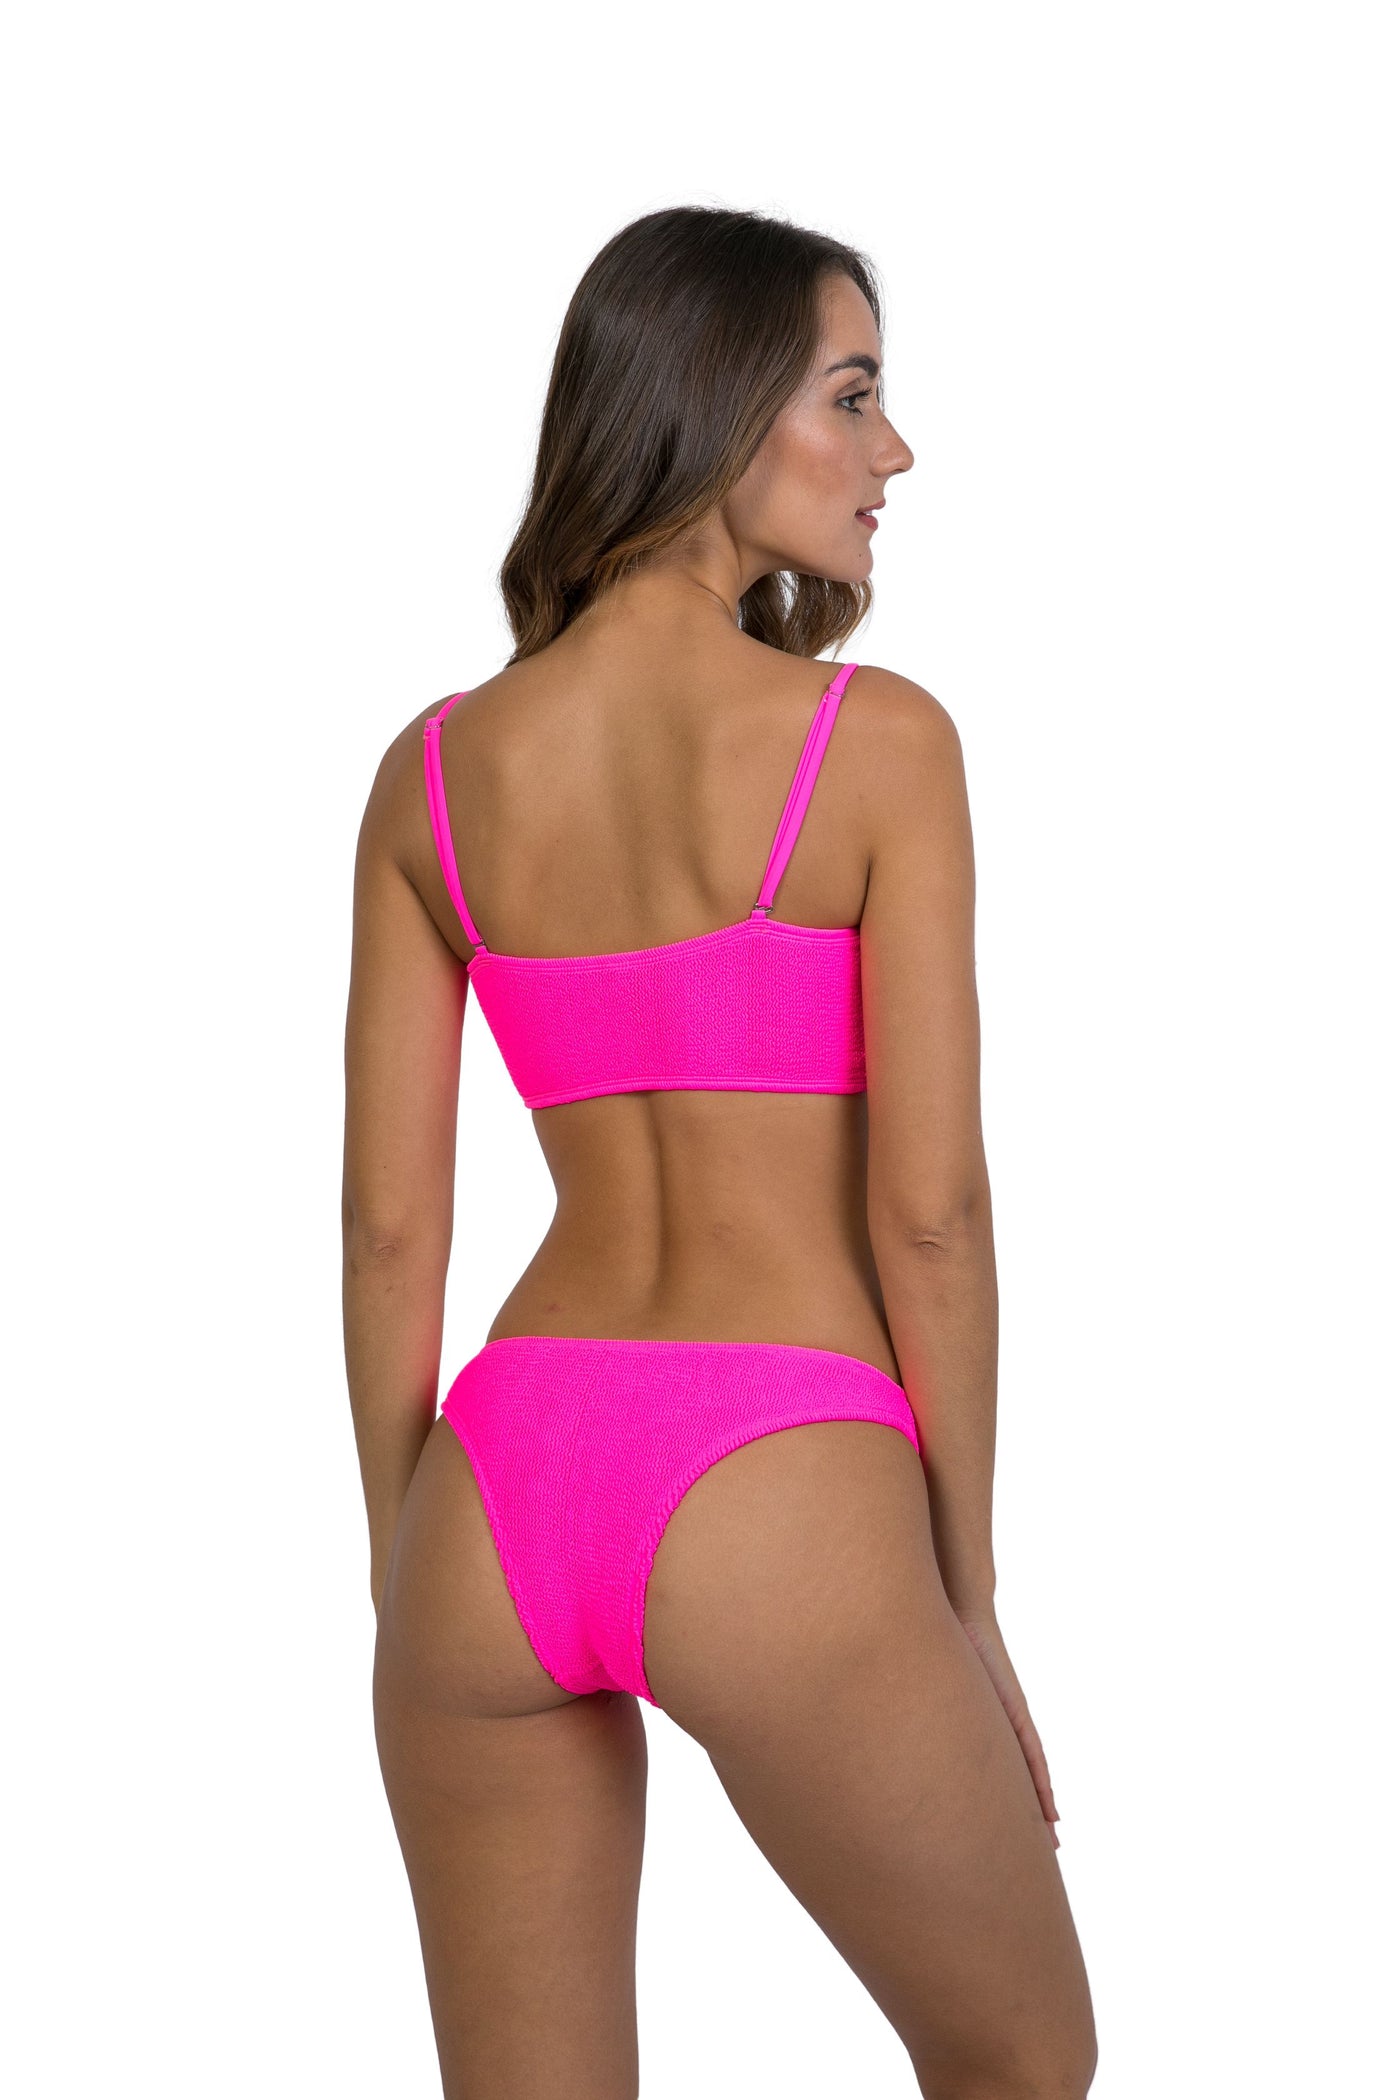 Turks And Caicos Tube with Straps One Size Bikini TOP ONLY (Neon Pink)